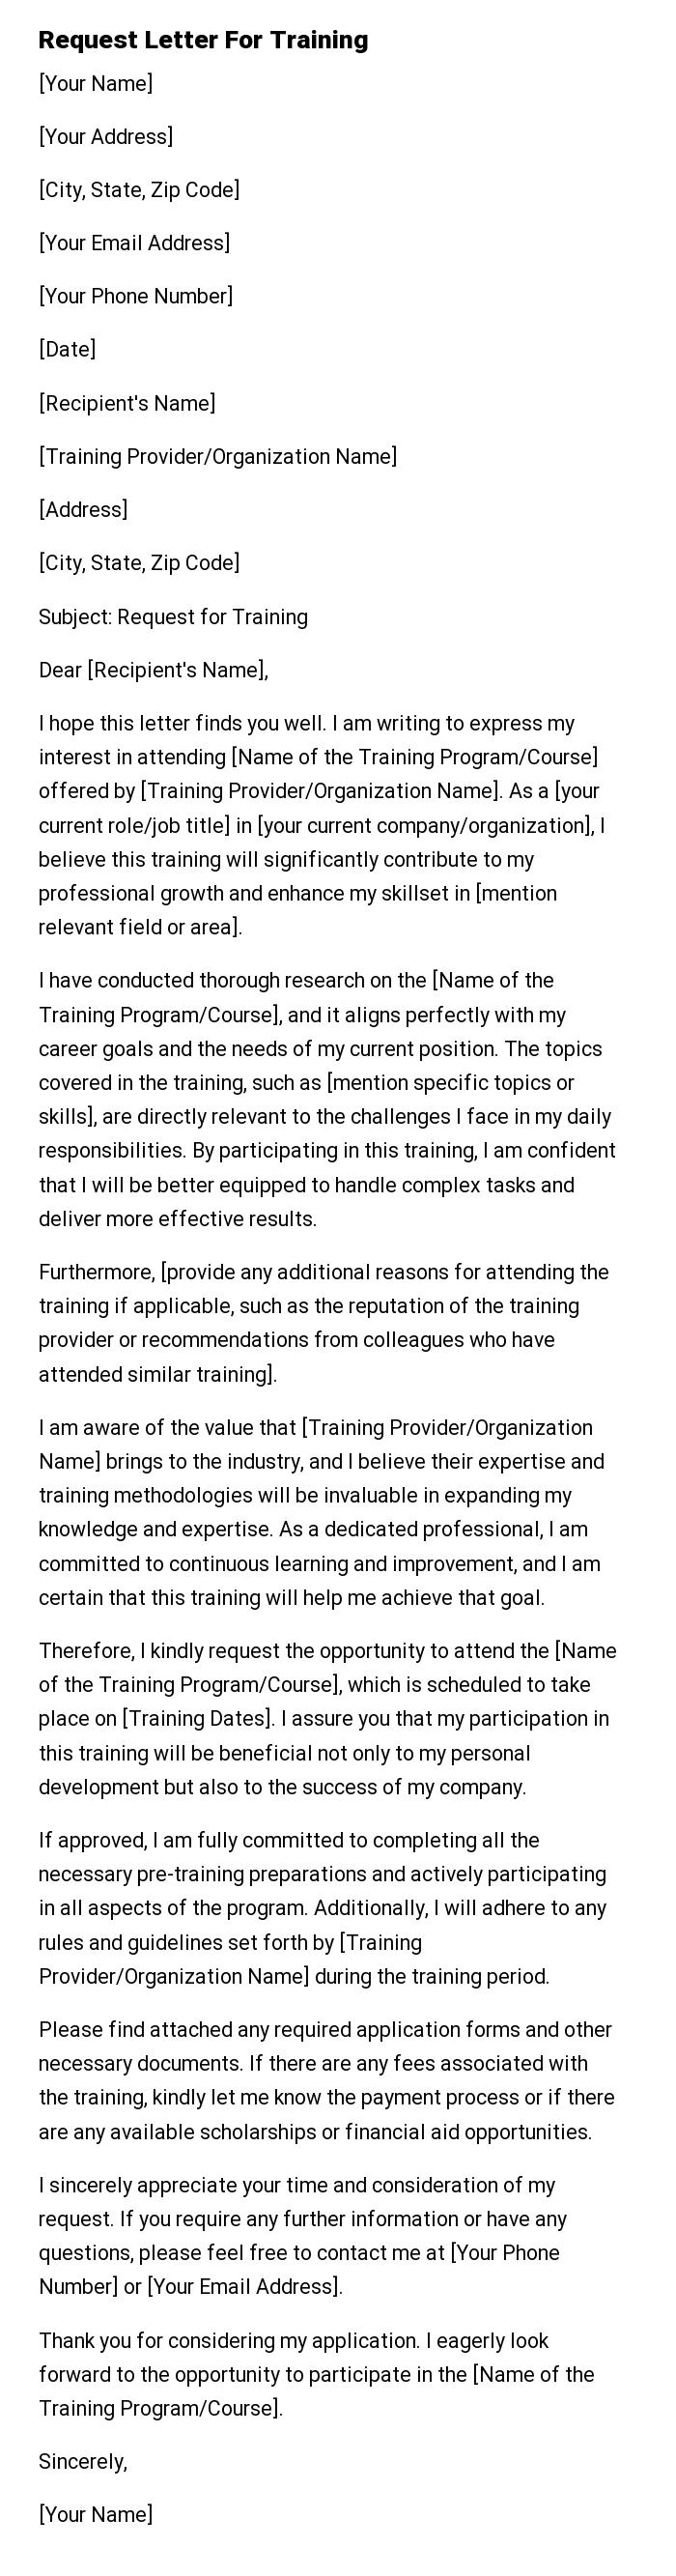 Request Letter For Training